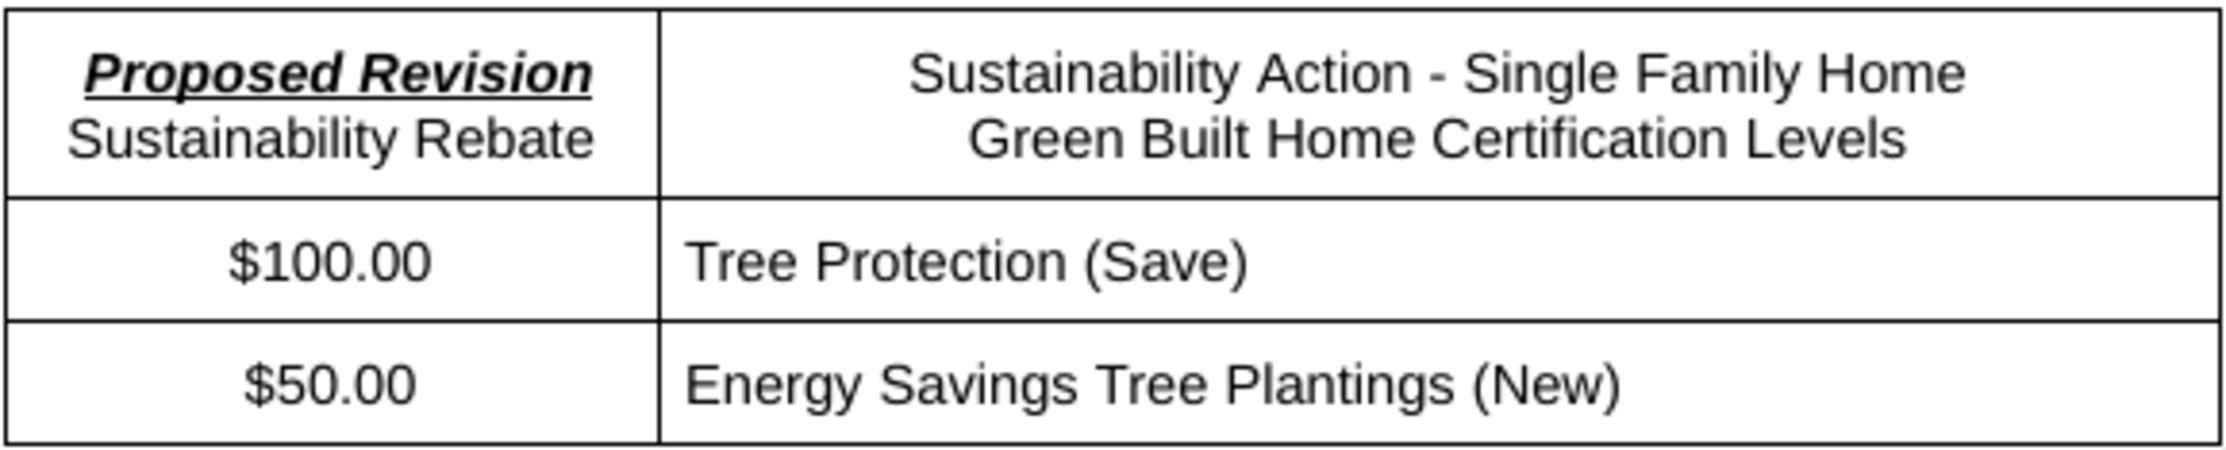 If the City of Asheville offered a higher rebate amount for saving trees instead of planting a new one like what s shown in the table would you be in favor of that change?